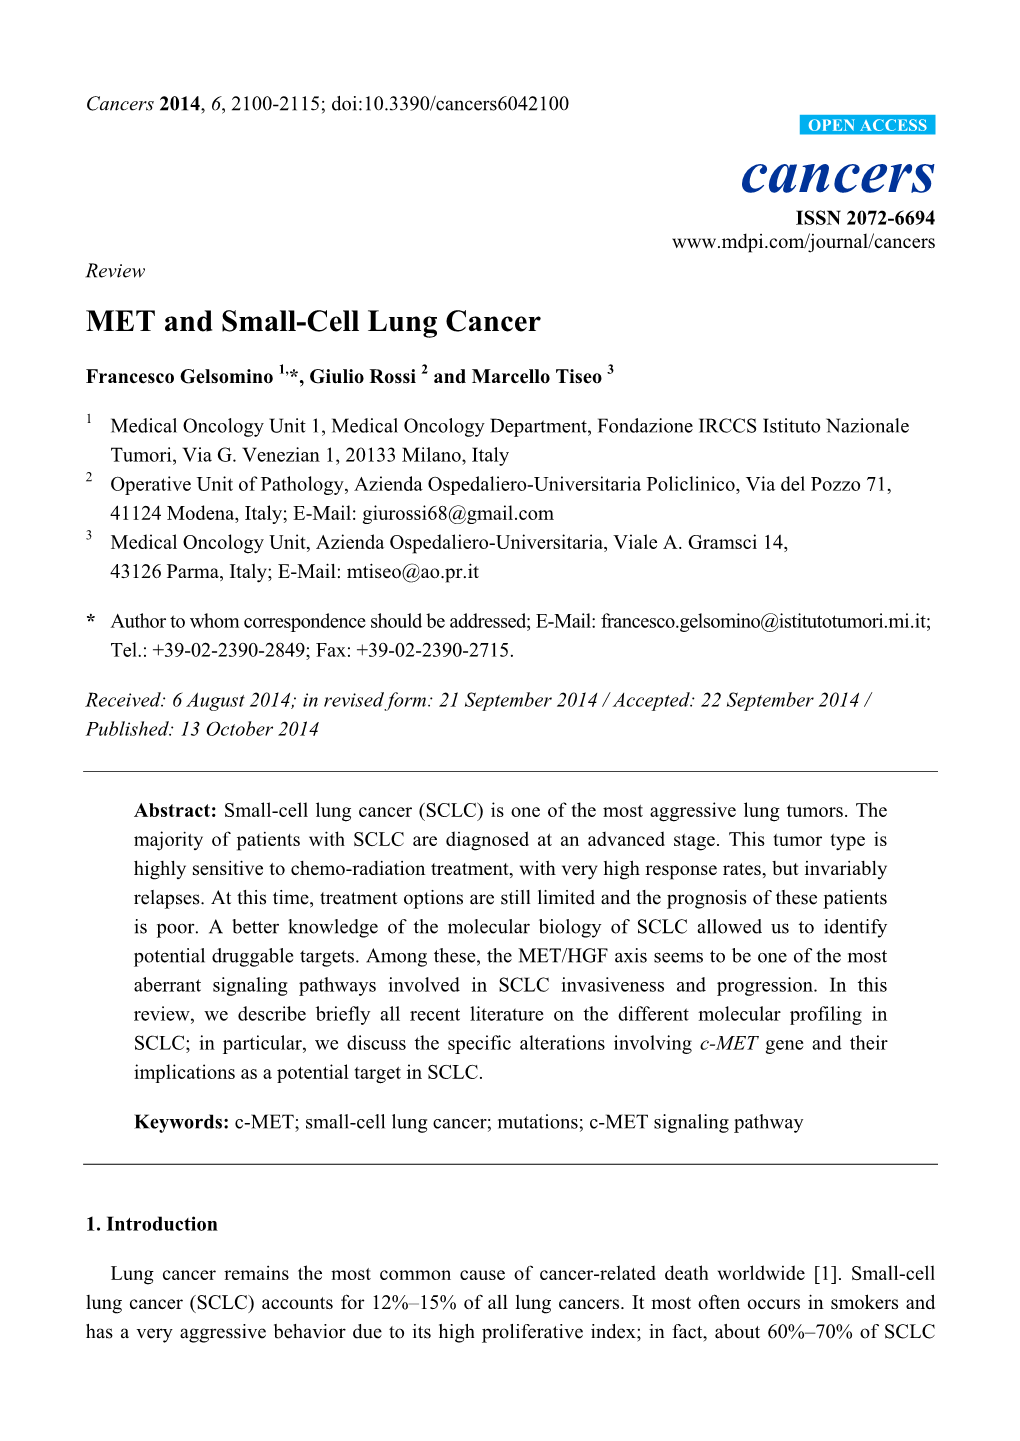 MET and Small-Cell Lung Cancer